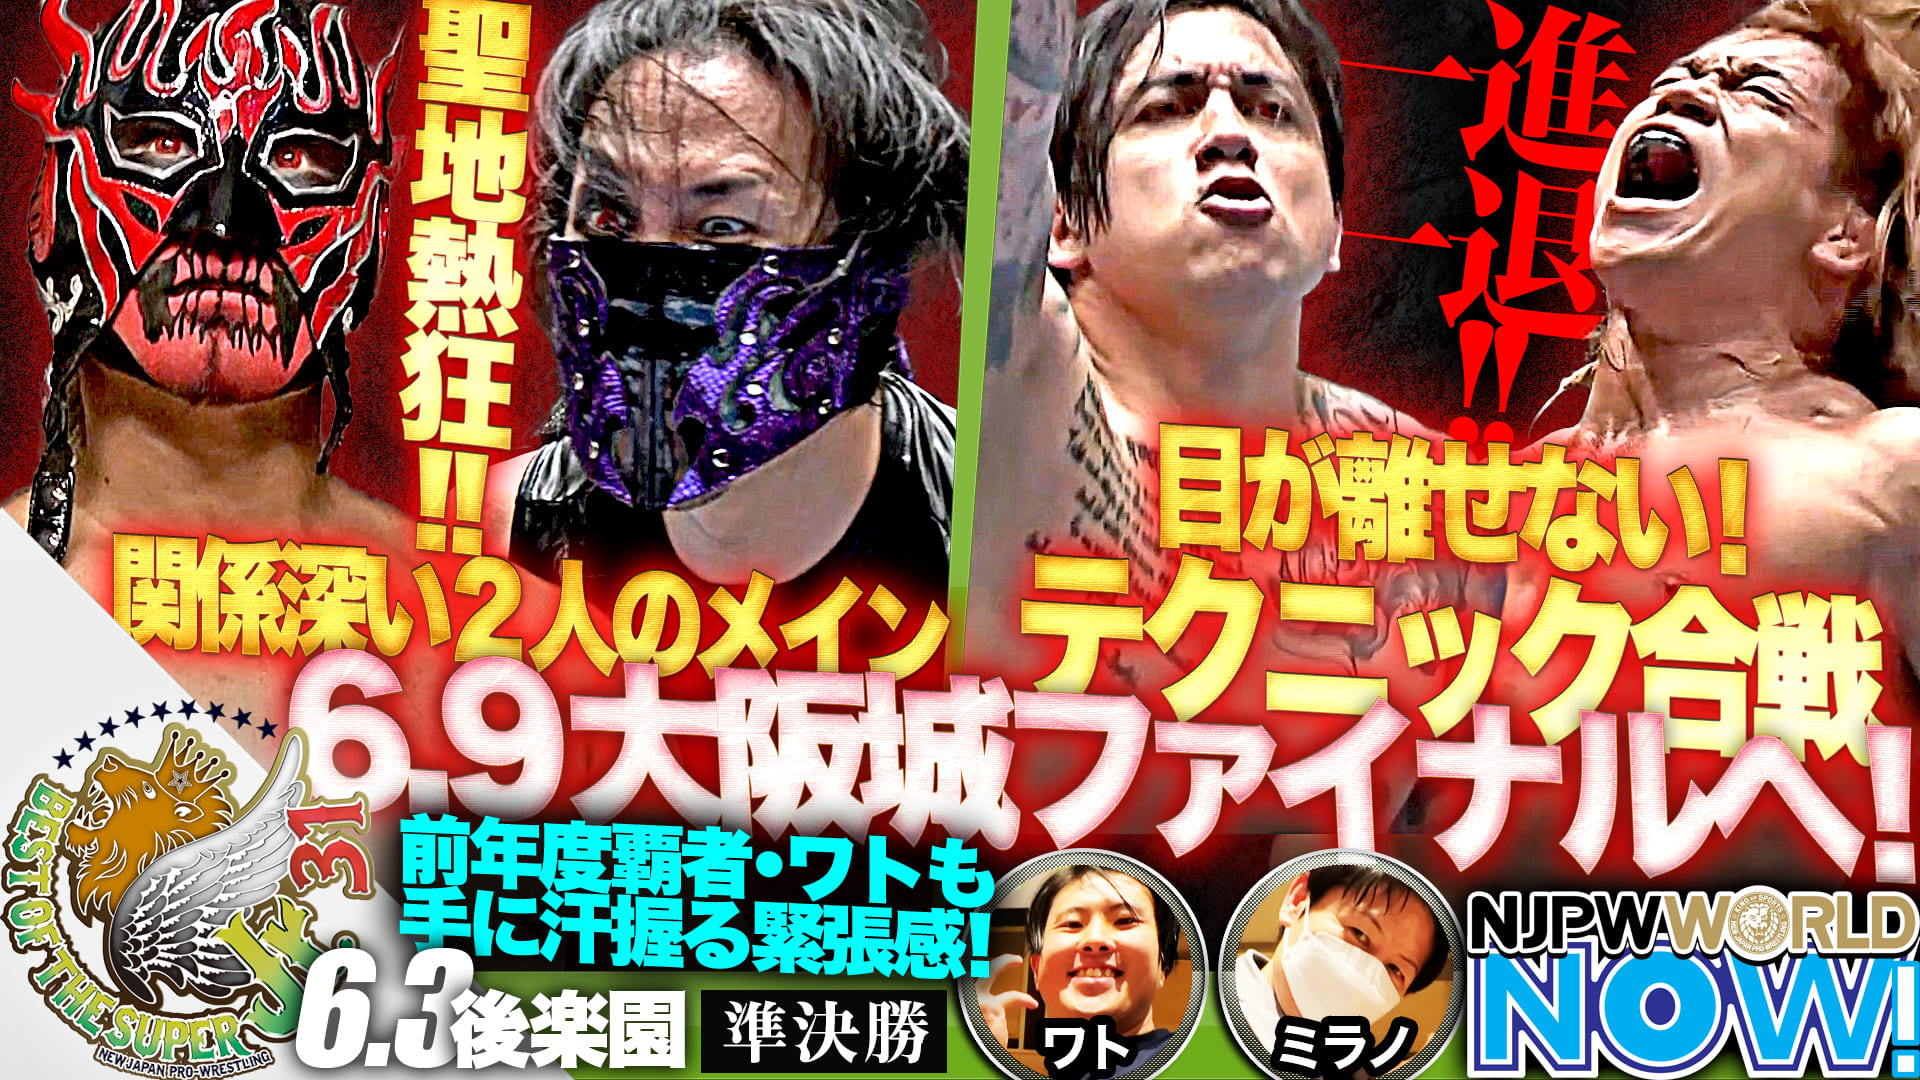 『BEST OF THE SUPER Jr.31』準決勝は前年度覇者のワトも手に汗握る緊張感！